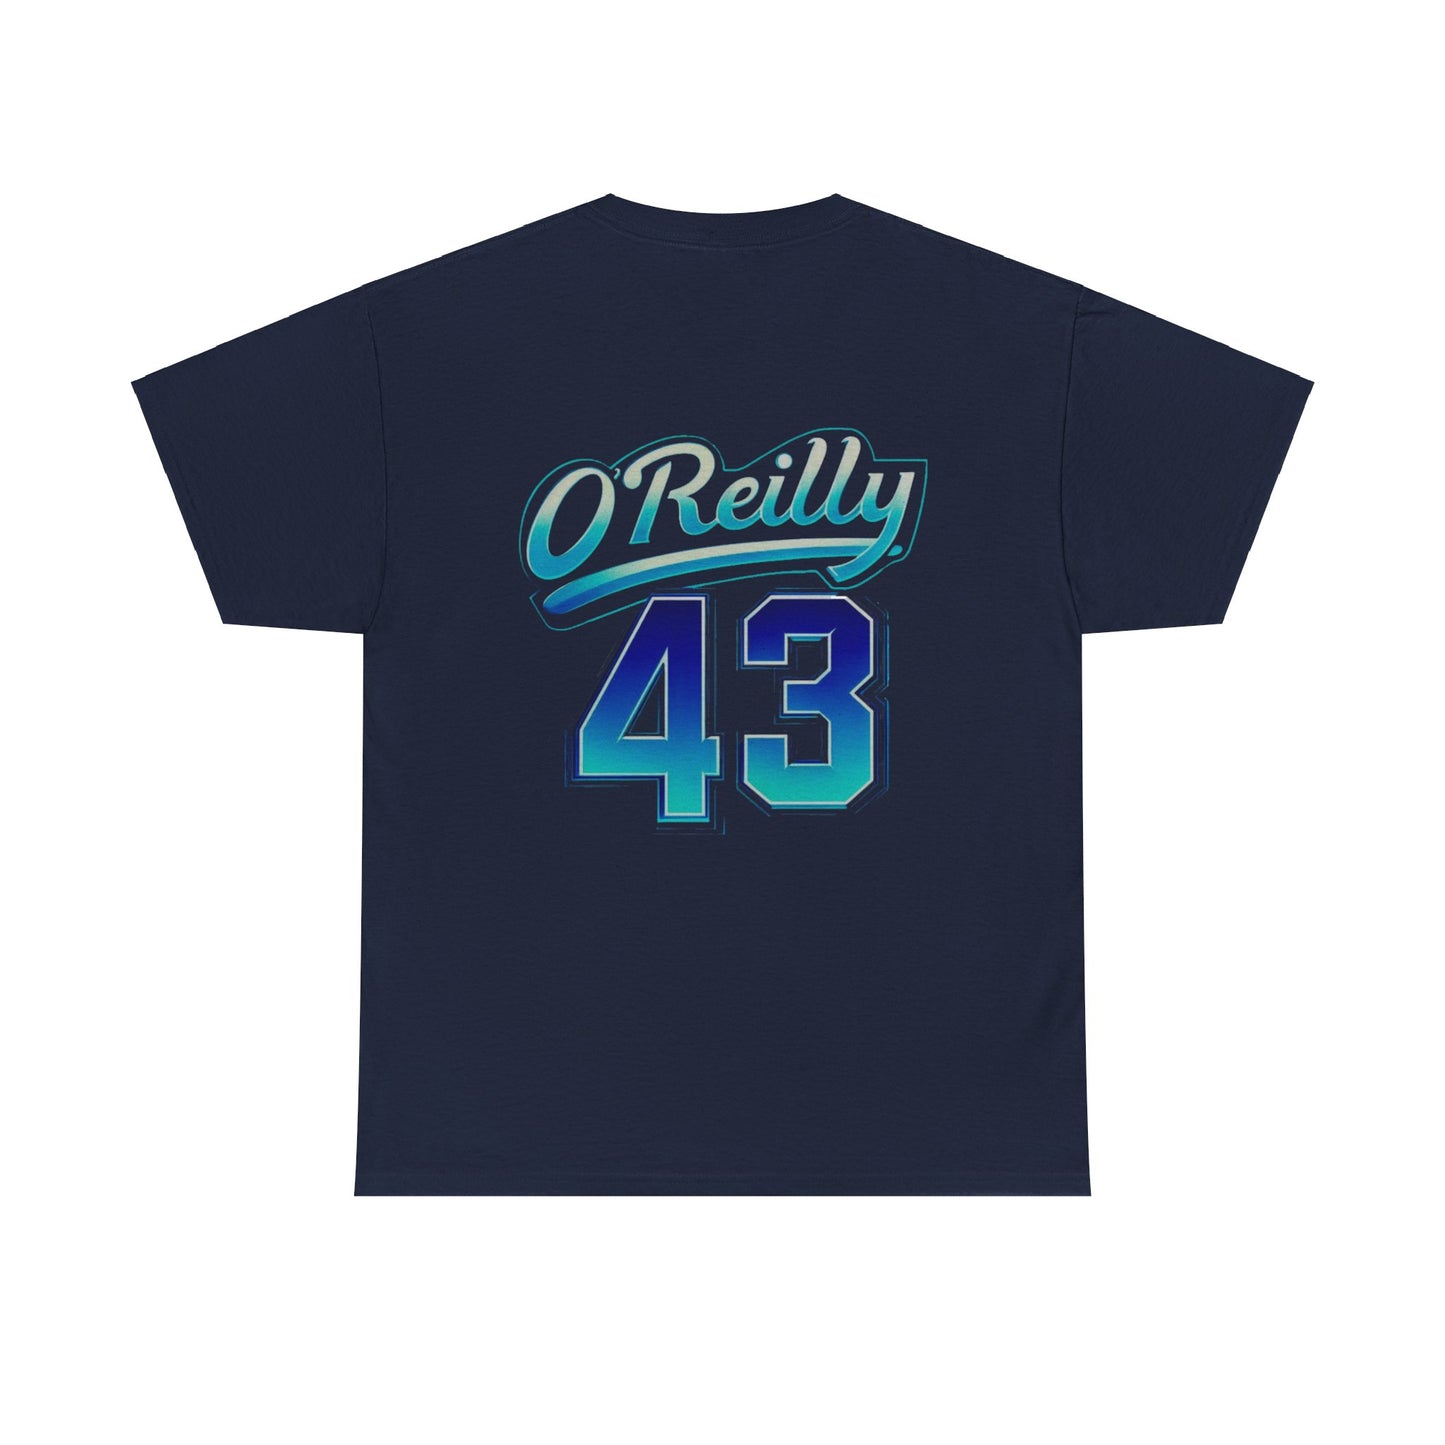 Don O'Reilly Logo - Double Sided Printed Tee